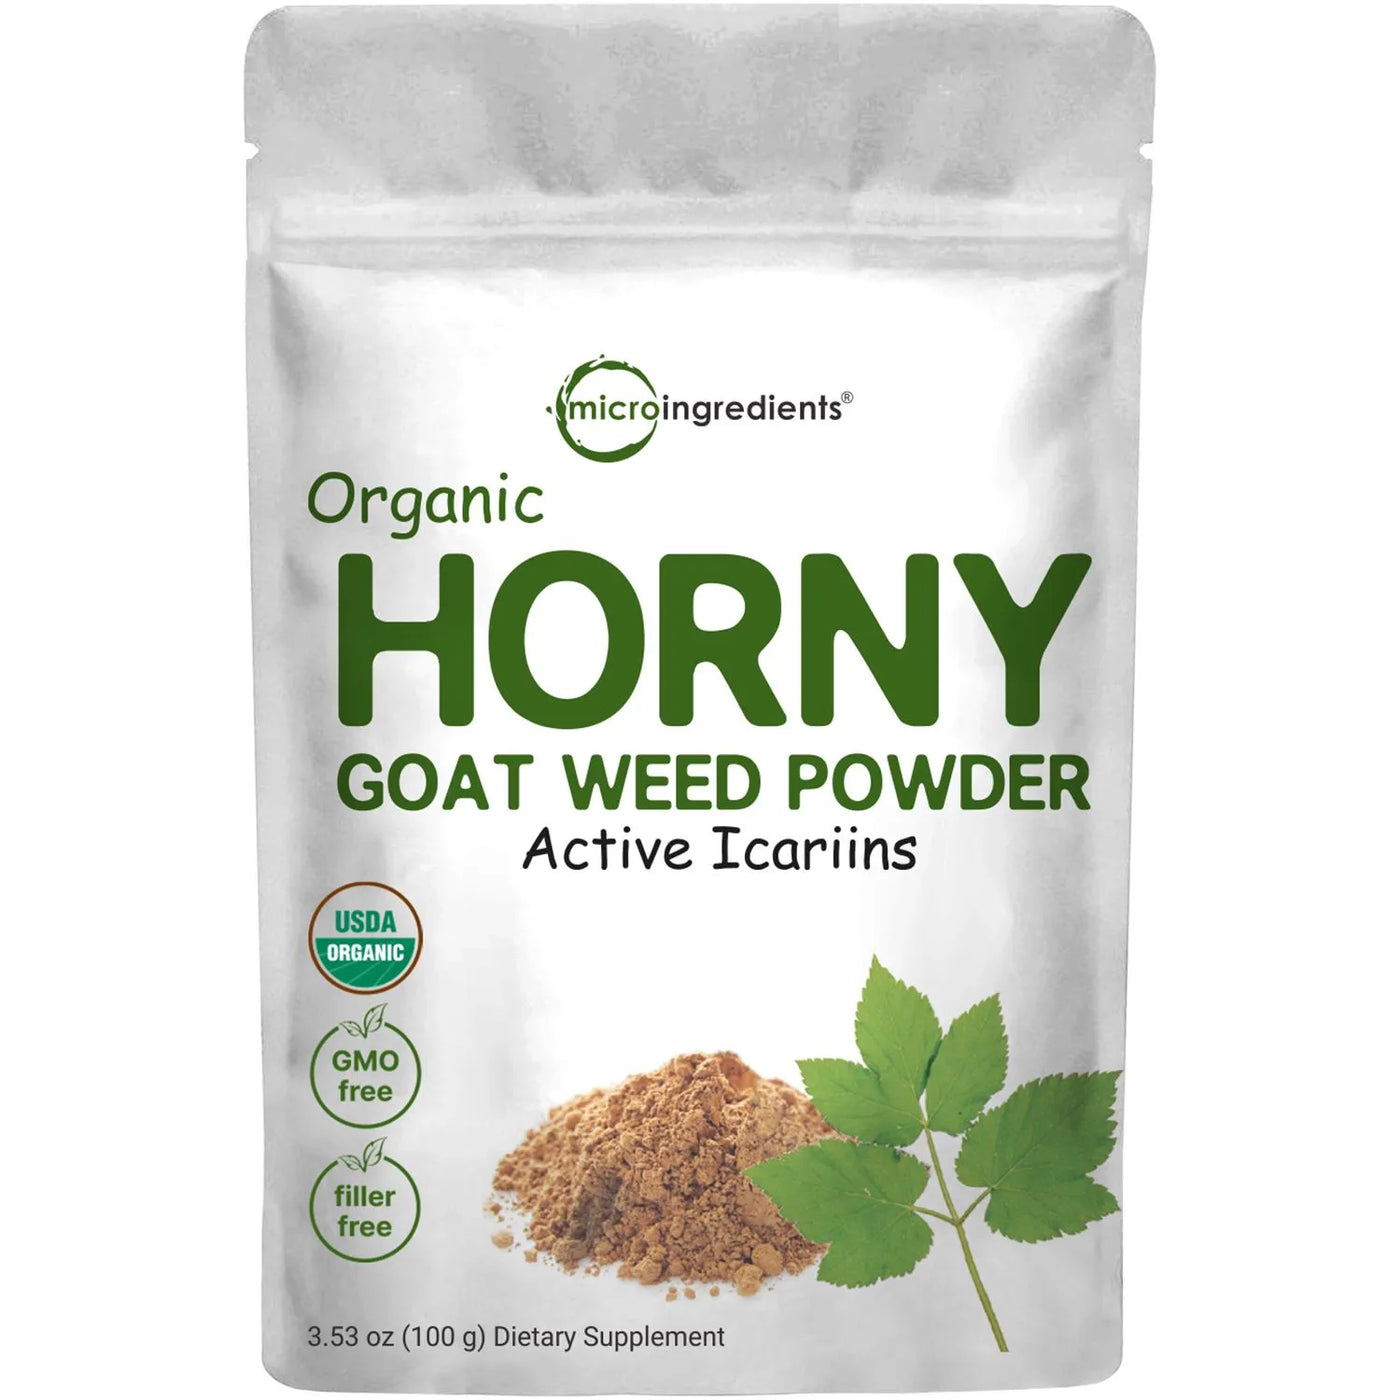 Organic Horny Goat Weed Powder Front